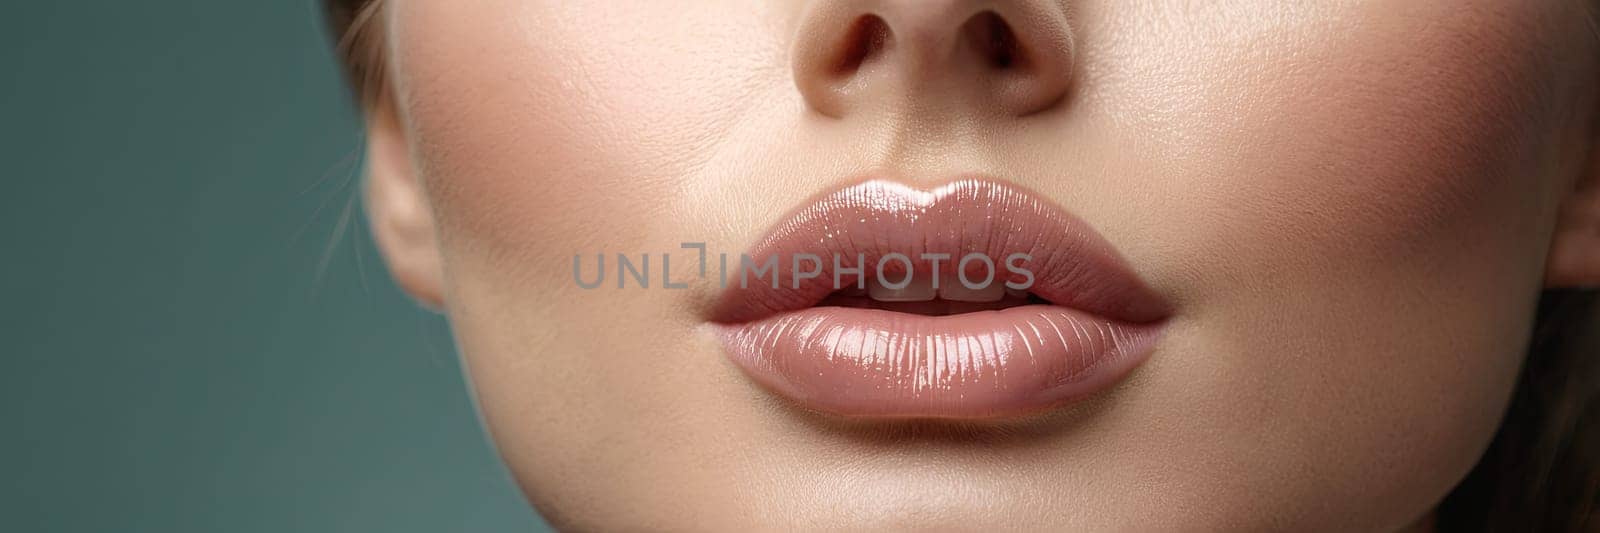 Close-up woman’s lower face, showcasing clear complexion against a blue background. Image captures detail of skin texture, lips, used for skin care promotion